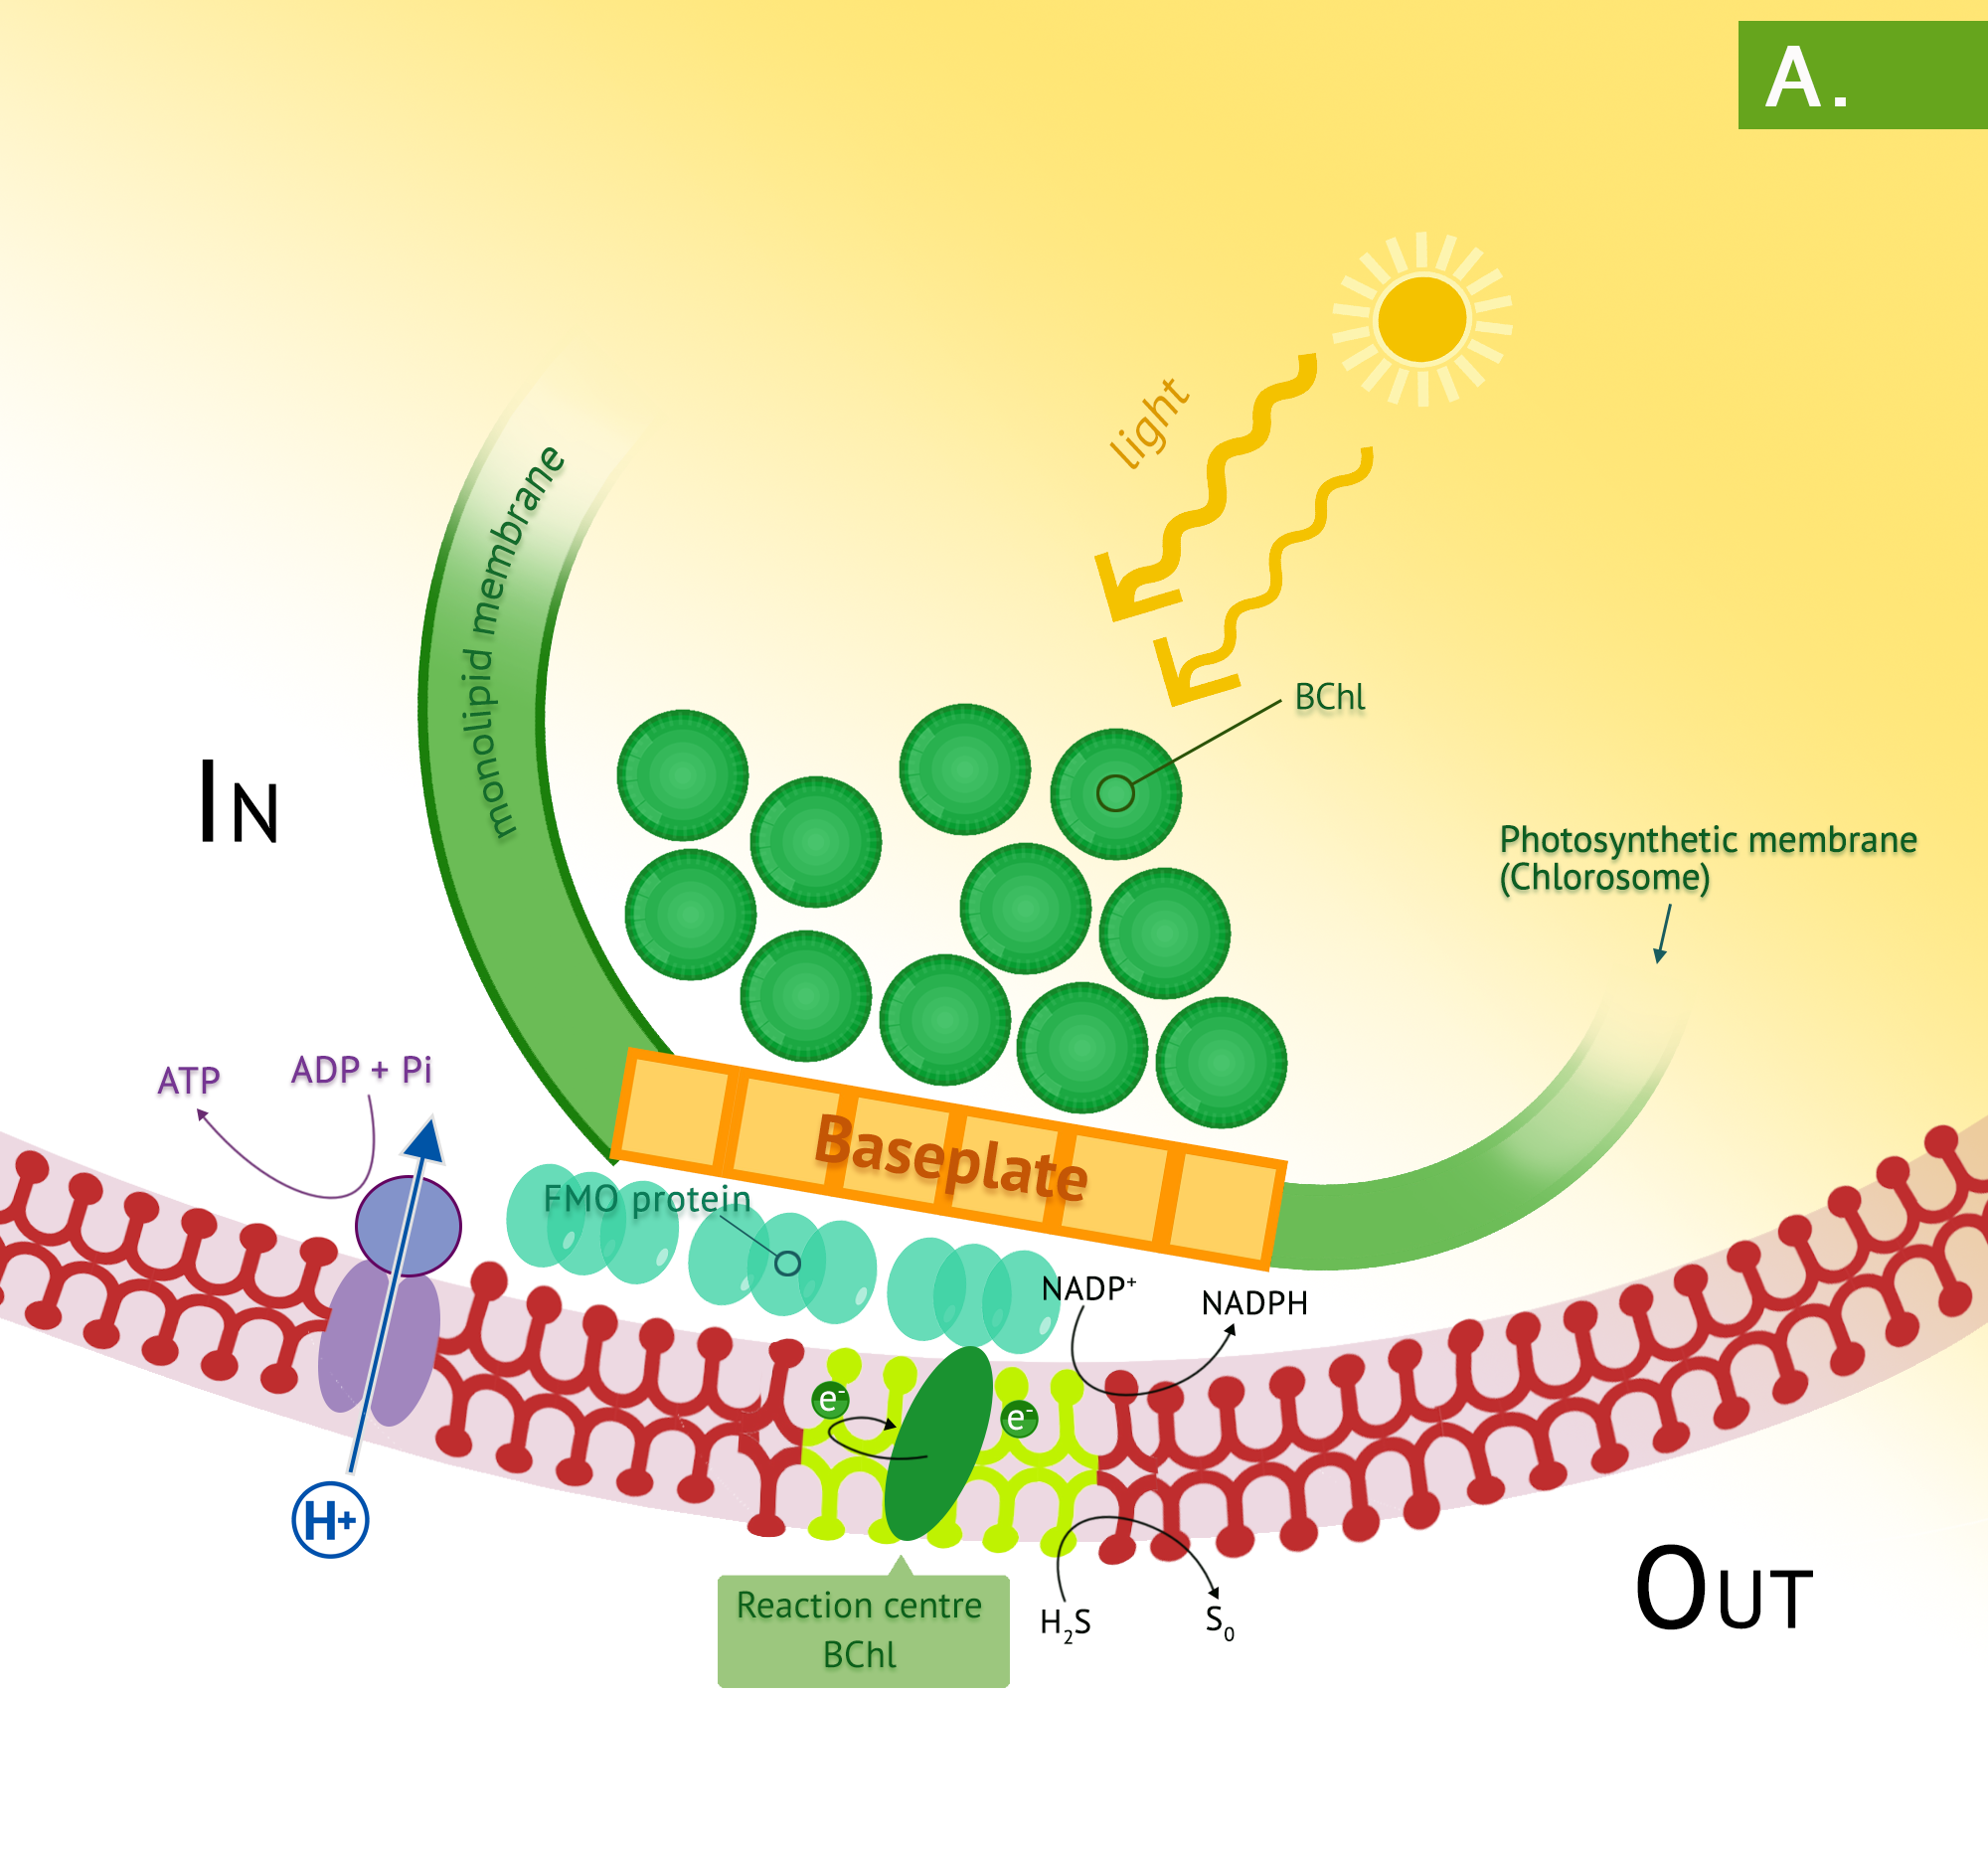 Panel A shows the chlorosomes of the green phototrophic bacteria. The photosynthetic antenna complex of the green phototrophs occurs in chlorosomes. These transfer energy to the green photosystem in the plasma membrane and PMF arising from the photosystem results in synthesis of ATP by the membrane-bound ATP synthase.